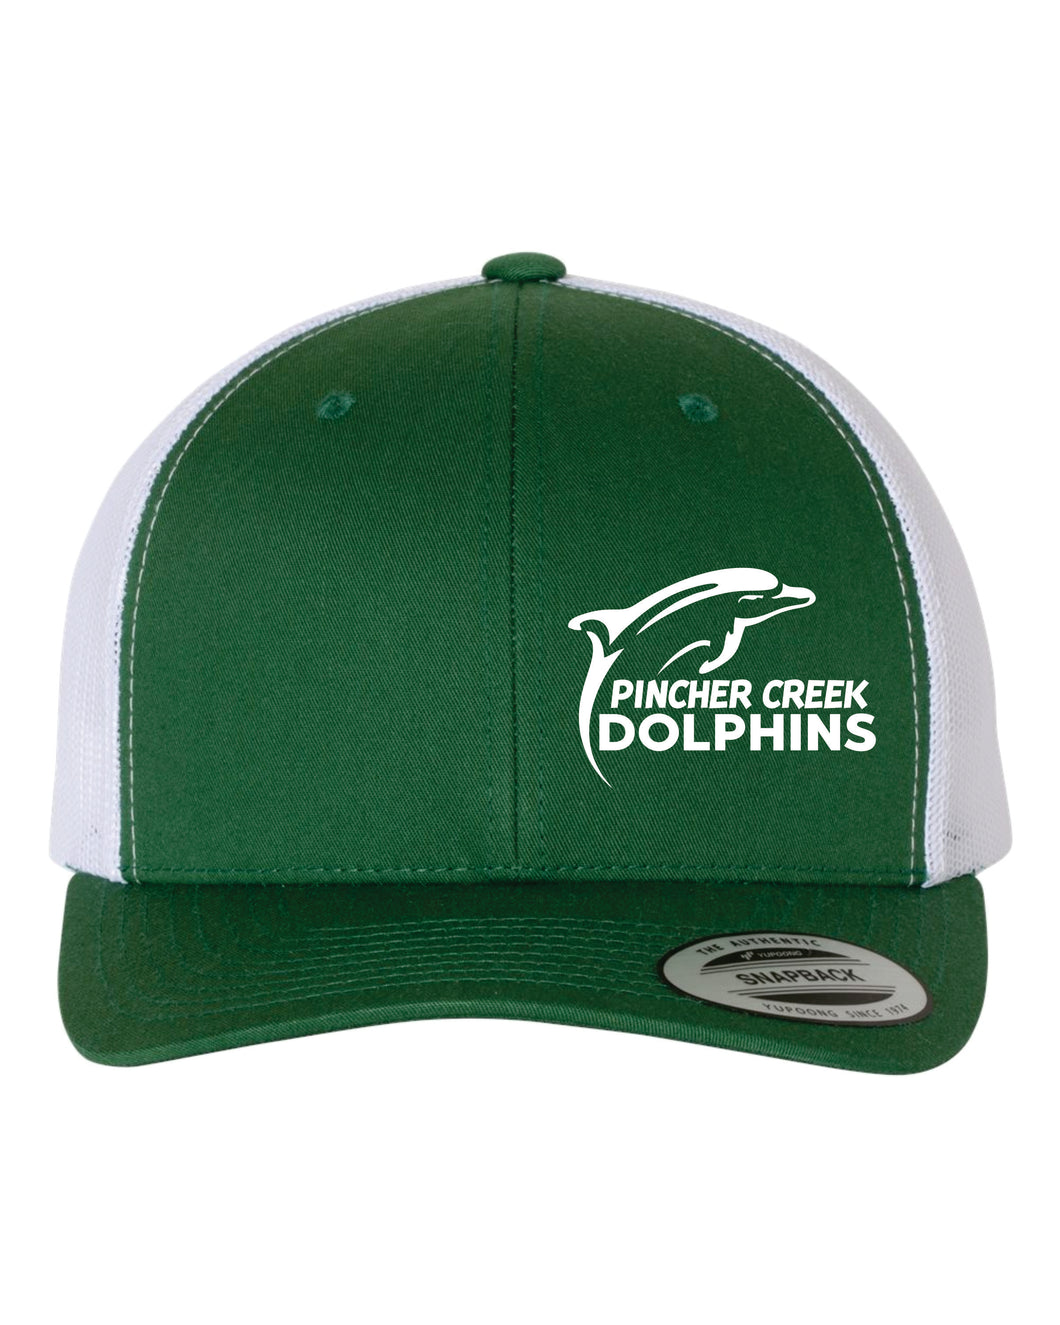 CURVED BRIM HAT 6606 WITH PC DOLPHINS LOGO - EMB